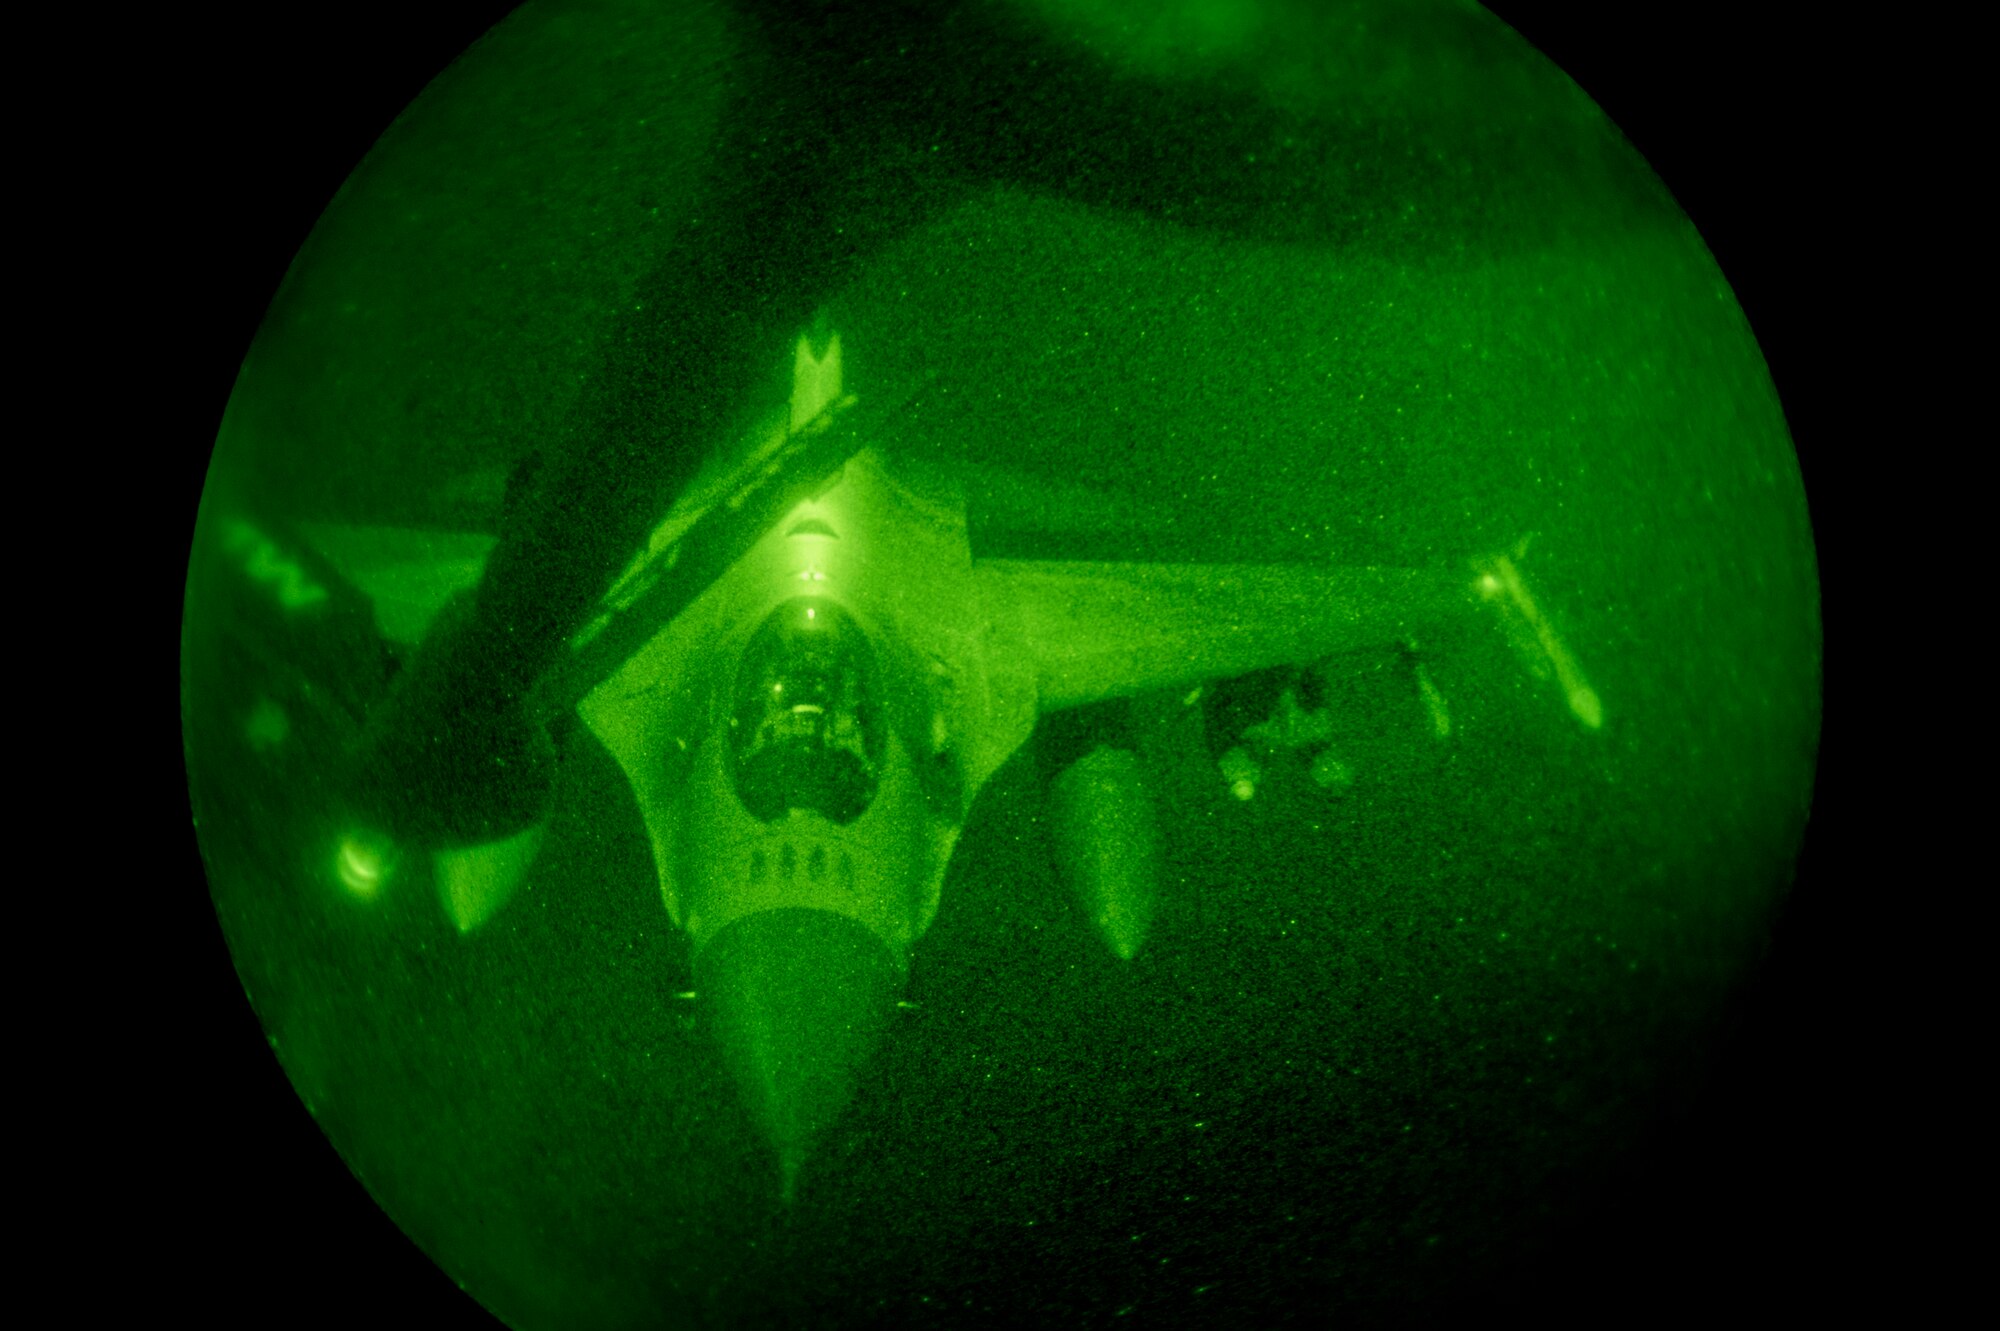 An F-16 Fighting Falcon receives fuel during an in-air refueling mission over an undisclosed location, Southwest Asia, April 25. The fuel was provided by a KC-135 Stratotanker from the 340th Expeditionary Air Refueling Squadron. (U.S. Air Force photo/Staff Sgt. Alexander Martinez)